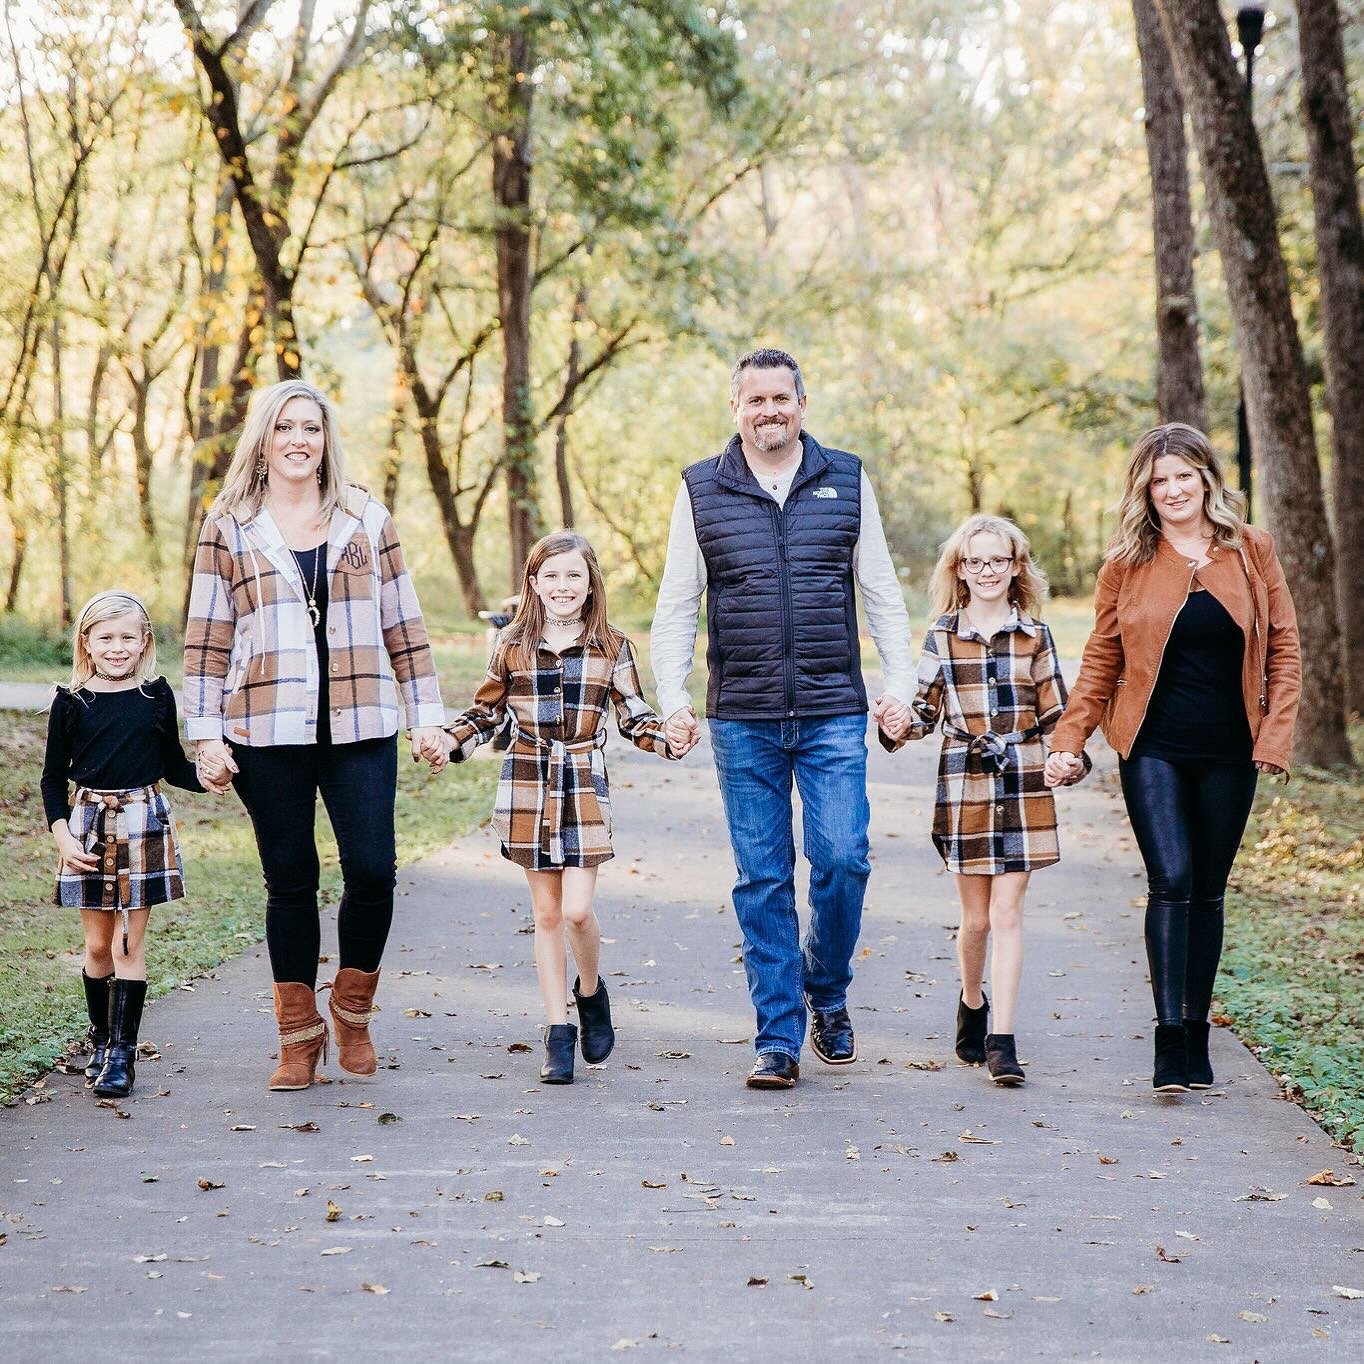 I&rsquo;ve really been enjoying my extended family sessions this year! What a fun gift for the grandparents! 
.
.
.
#extendedfamilyphotos #acworthfamilyphotographer #cartersvillefamilyphotographer #kennesawfamilyphotographer